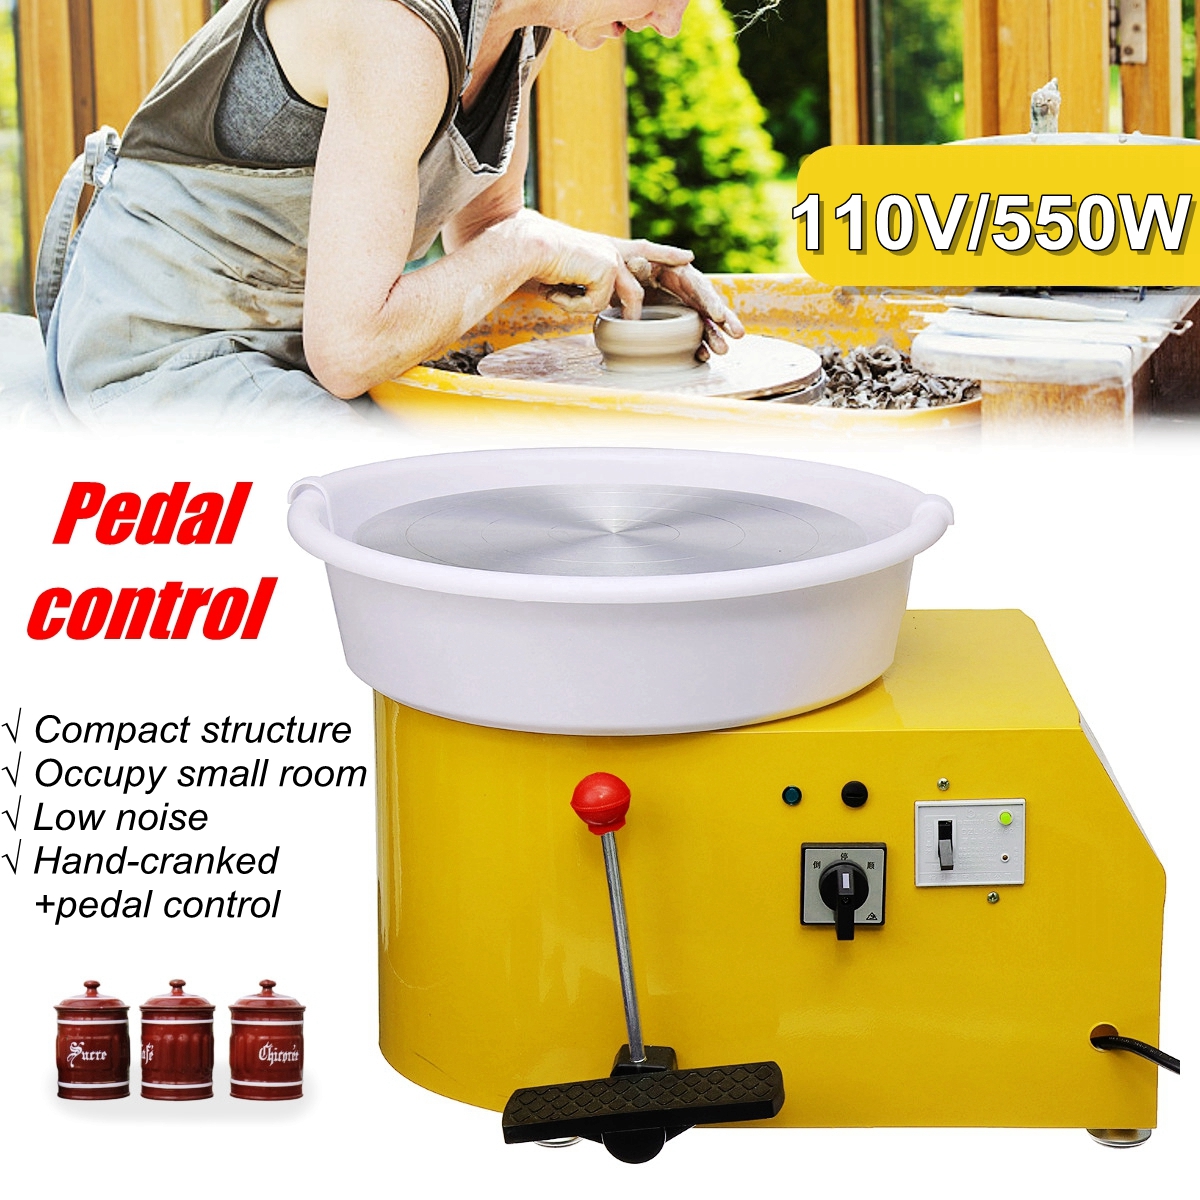 2-in-1-110V-550W-32CM-Electric-Pottery-Wheel-Machine-For-Ceramic-Work-Clay-Art-Craft-1407062-2